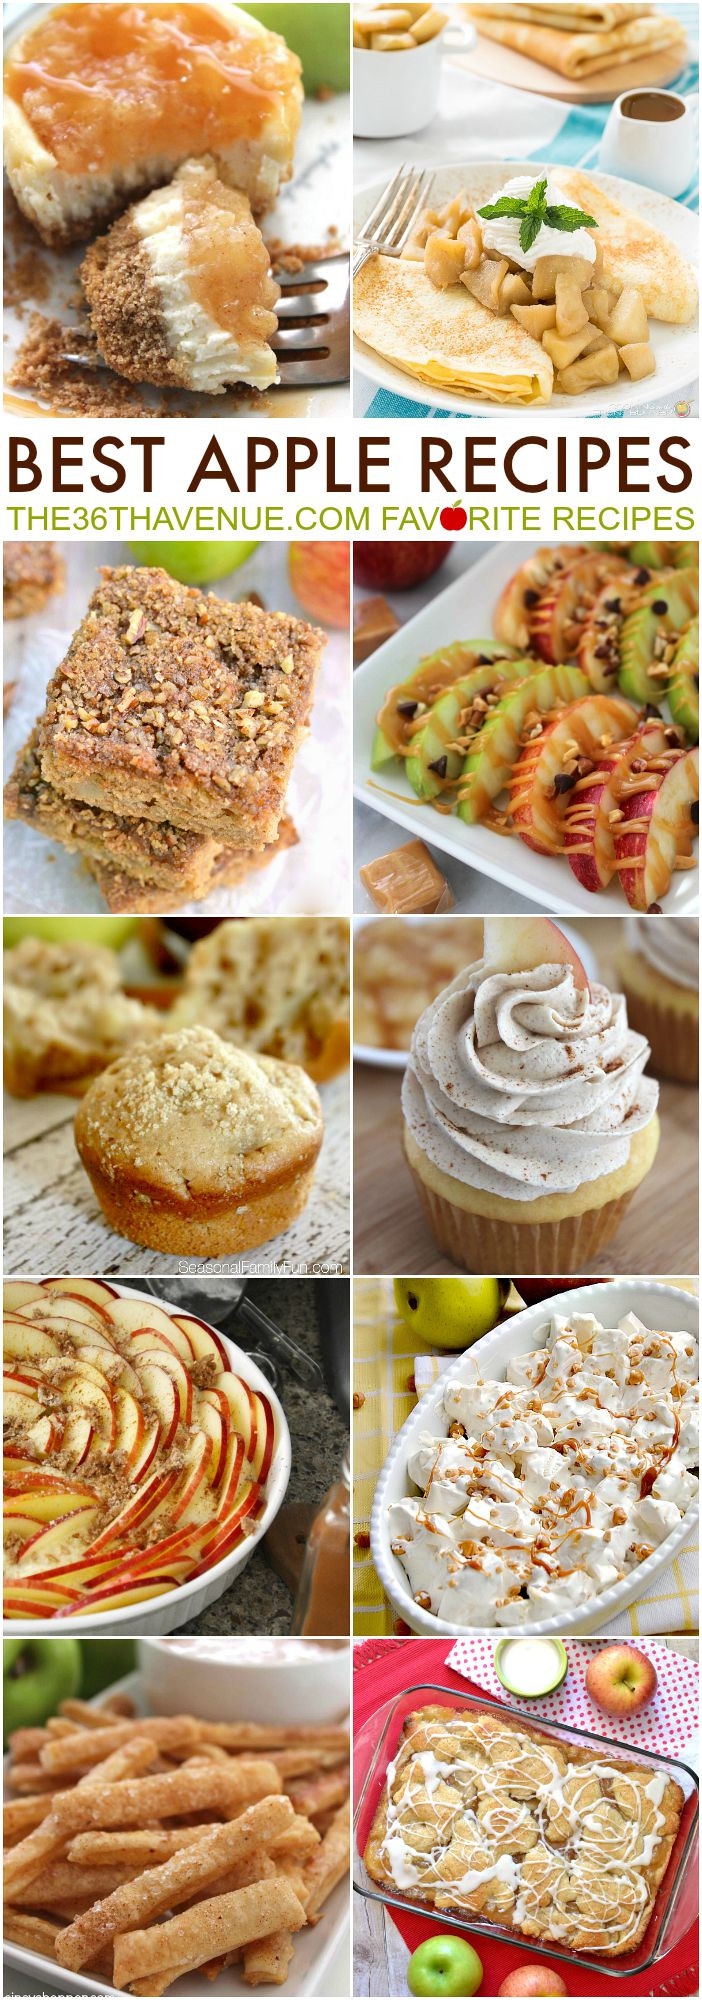 Apple Recipes For Fall
 Best Apple Recipes The 36th AVENUE